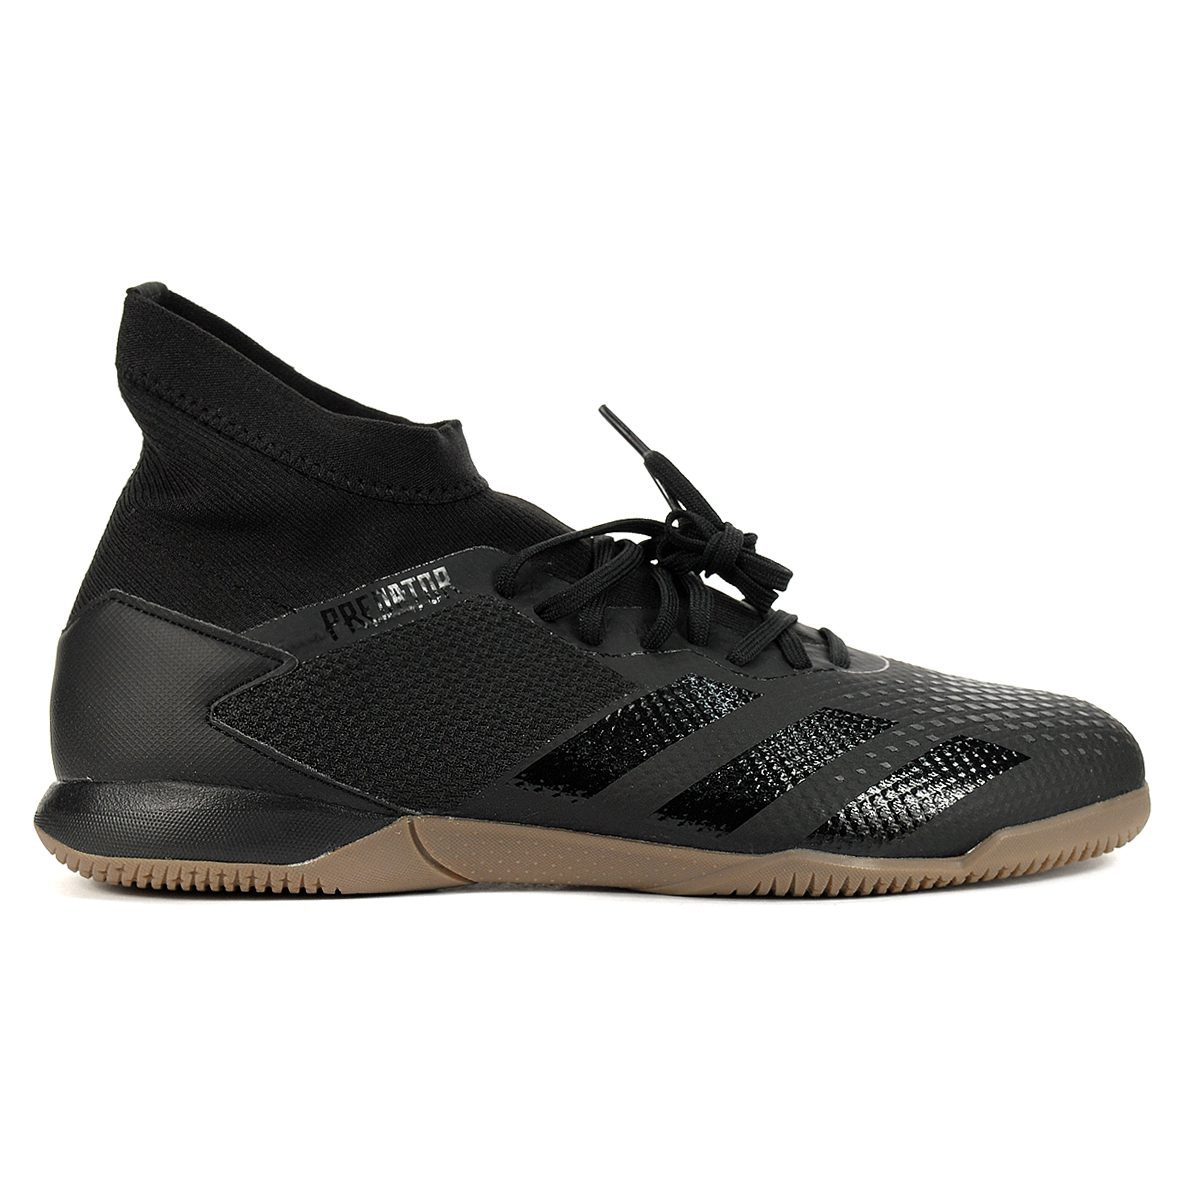 adidas mens indoor soccer shoes